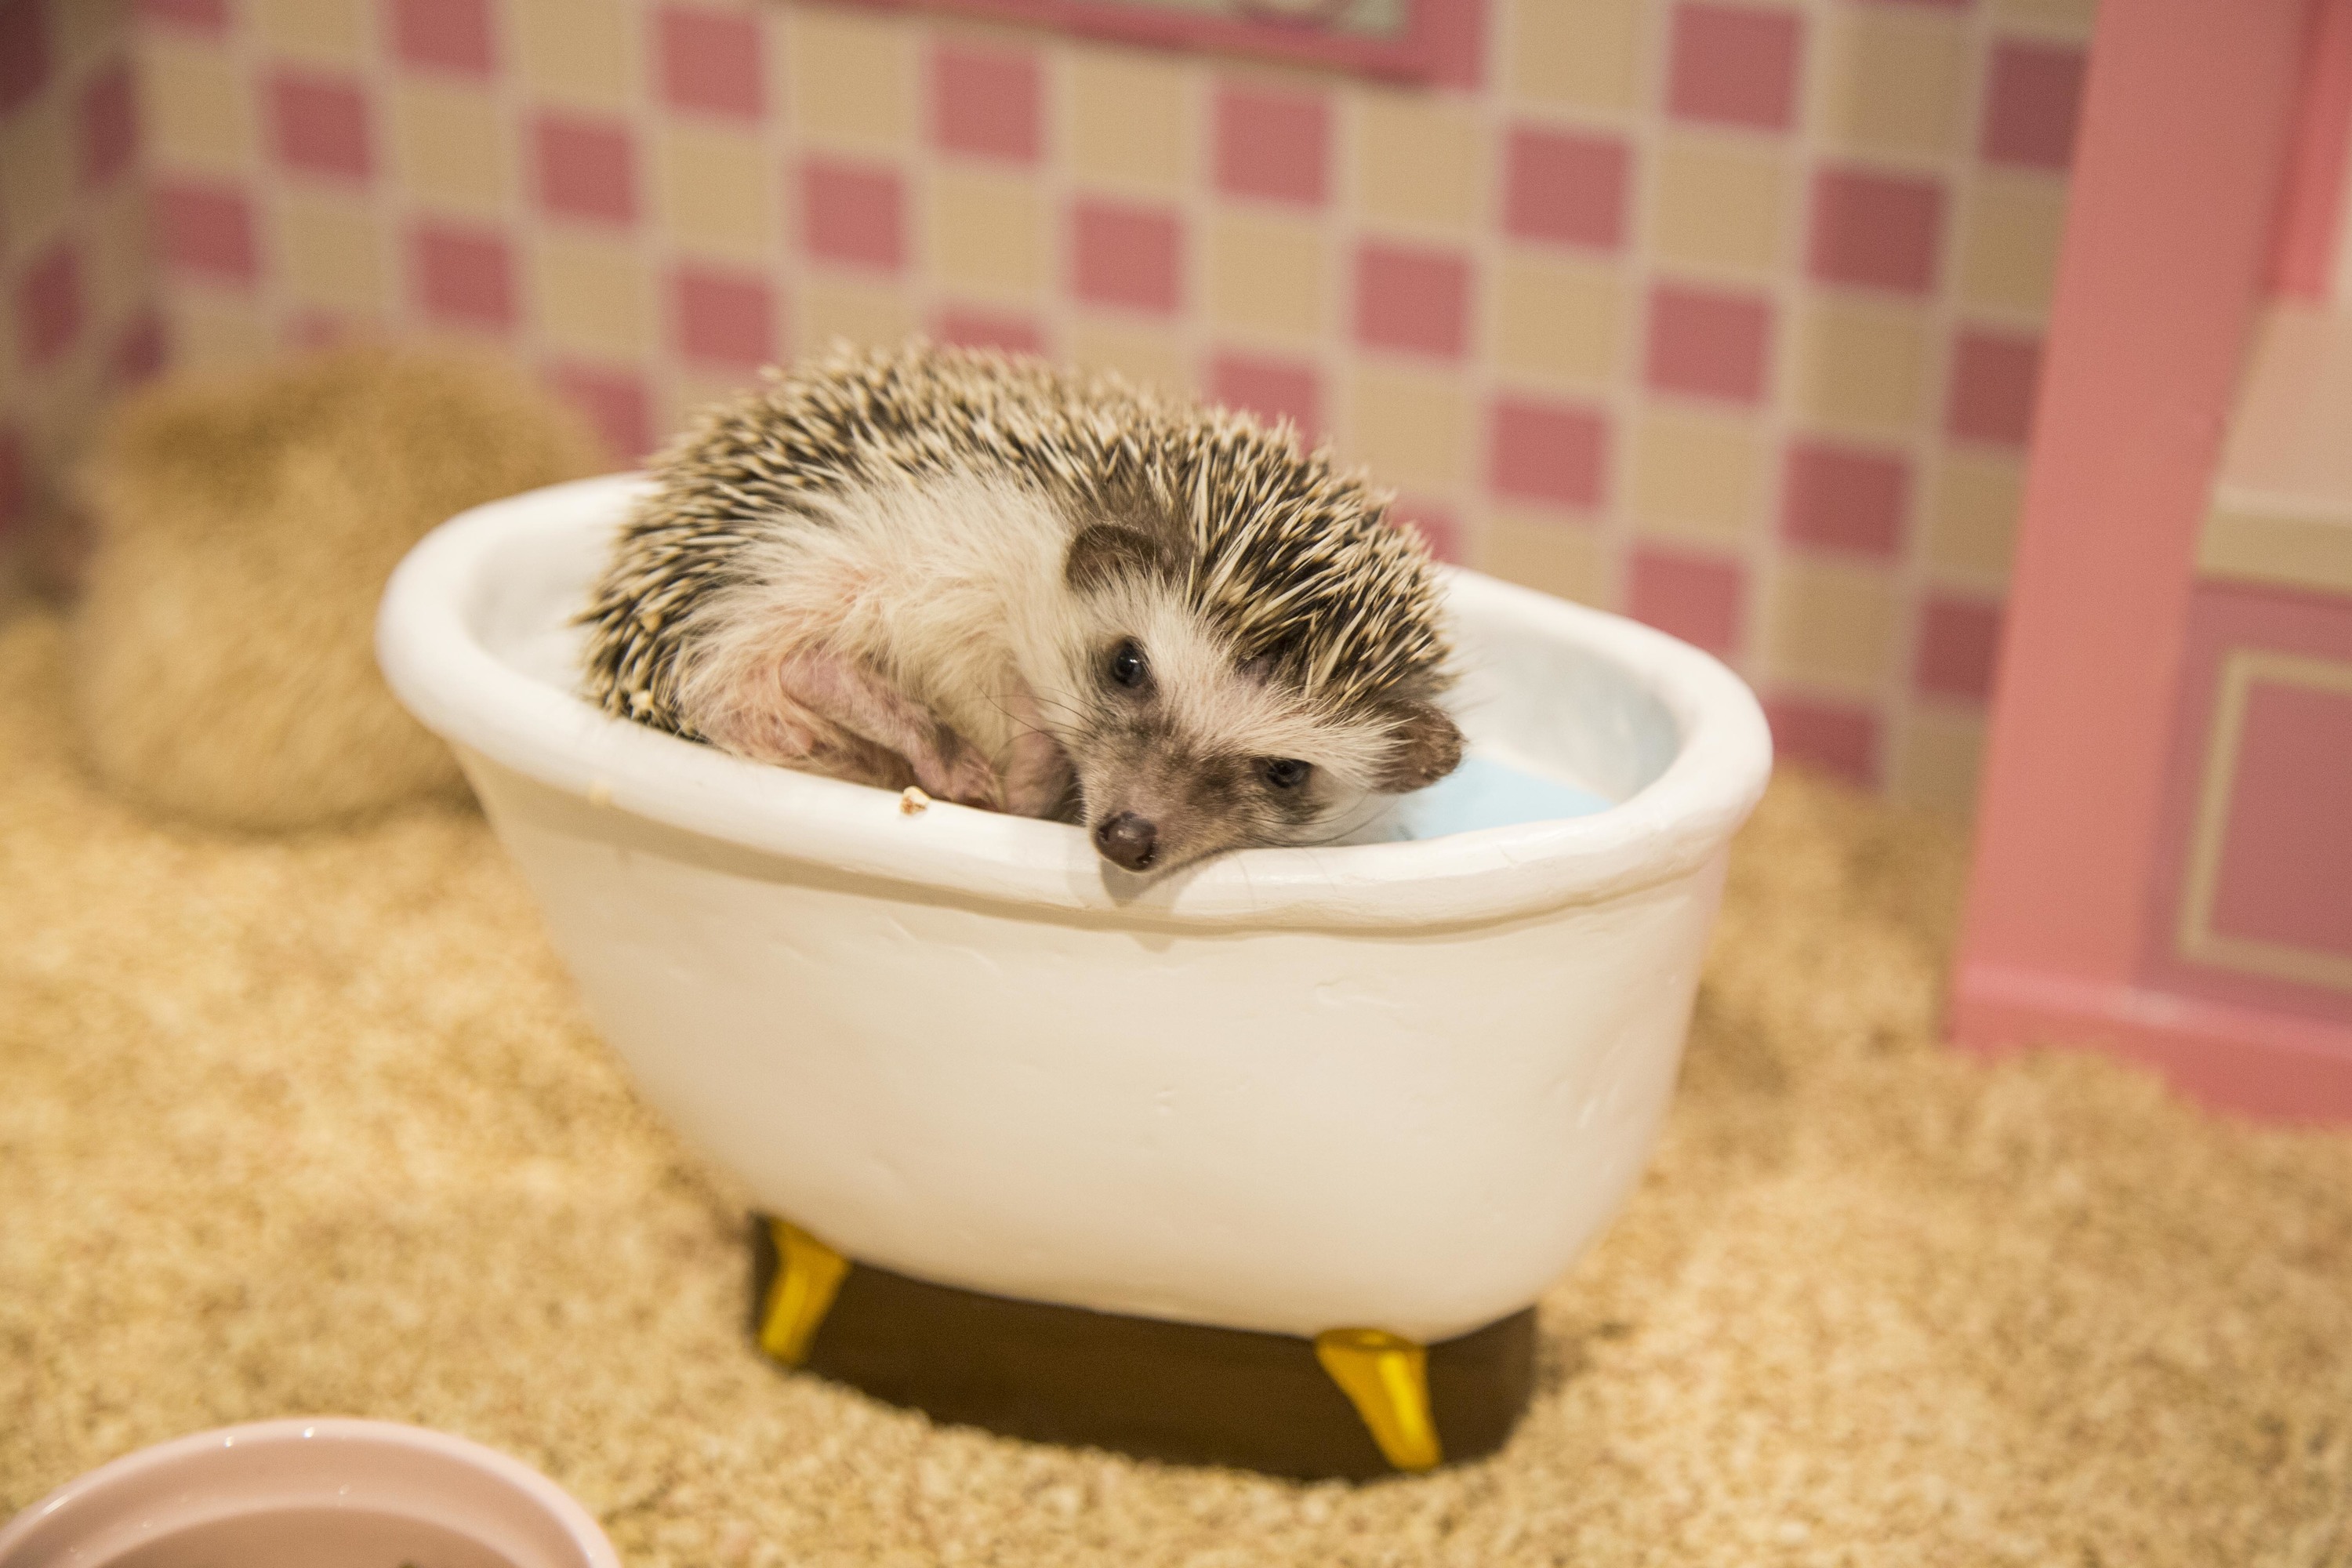 25 Pictures That Show Hedgehogs are the Cutest -